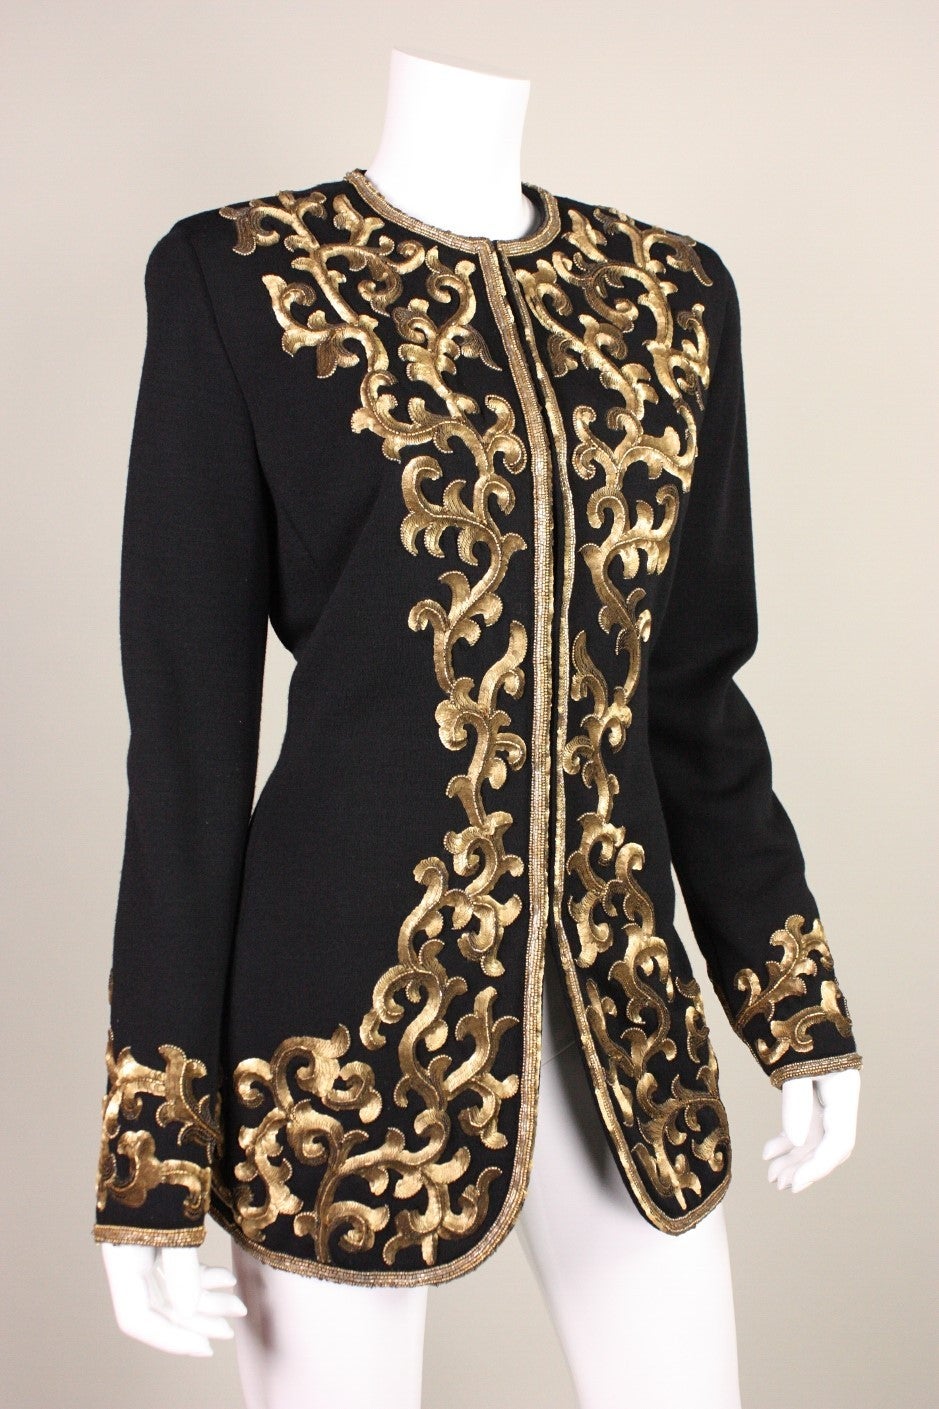 Donna Karan Black Jacket with Gold Sequined Embellishment.  Lined.  Center front hook and eye closures.

Fits approximately a size 6-8.